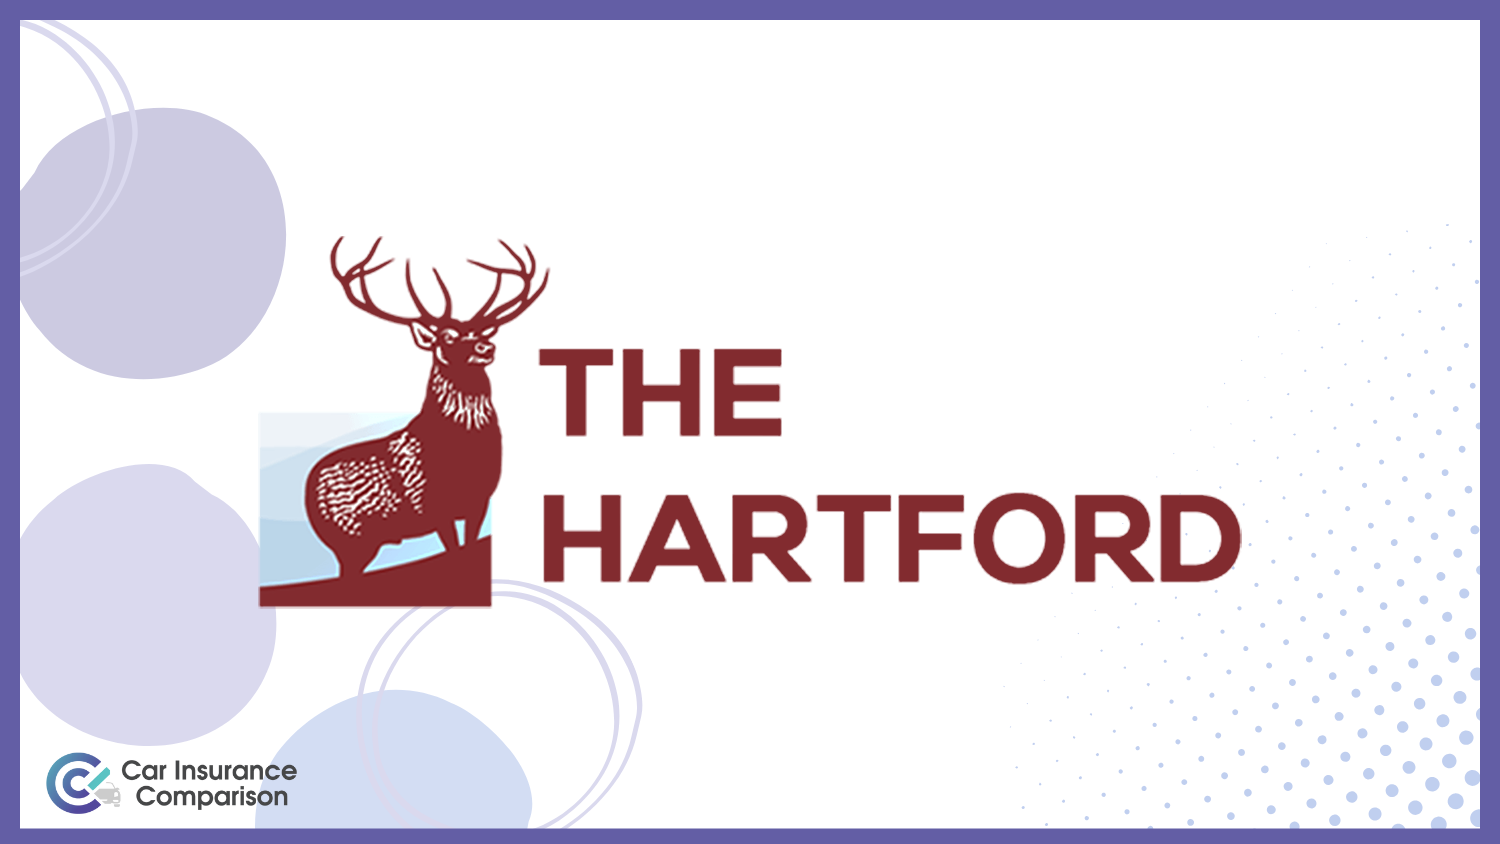 The Hartford: Best Commercial Car Insurance Companies